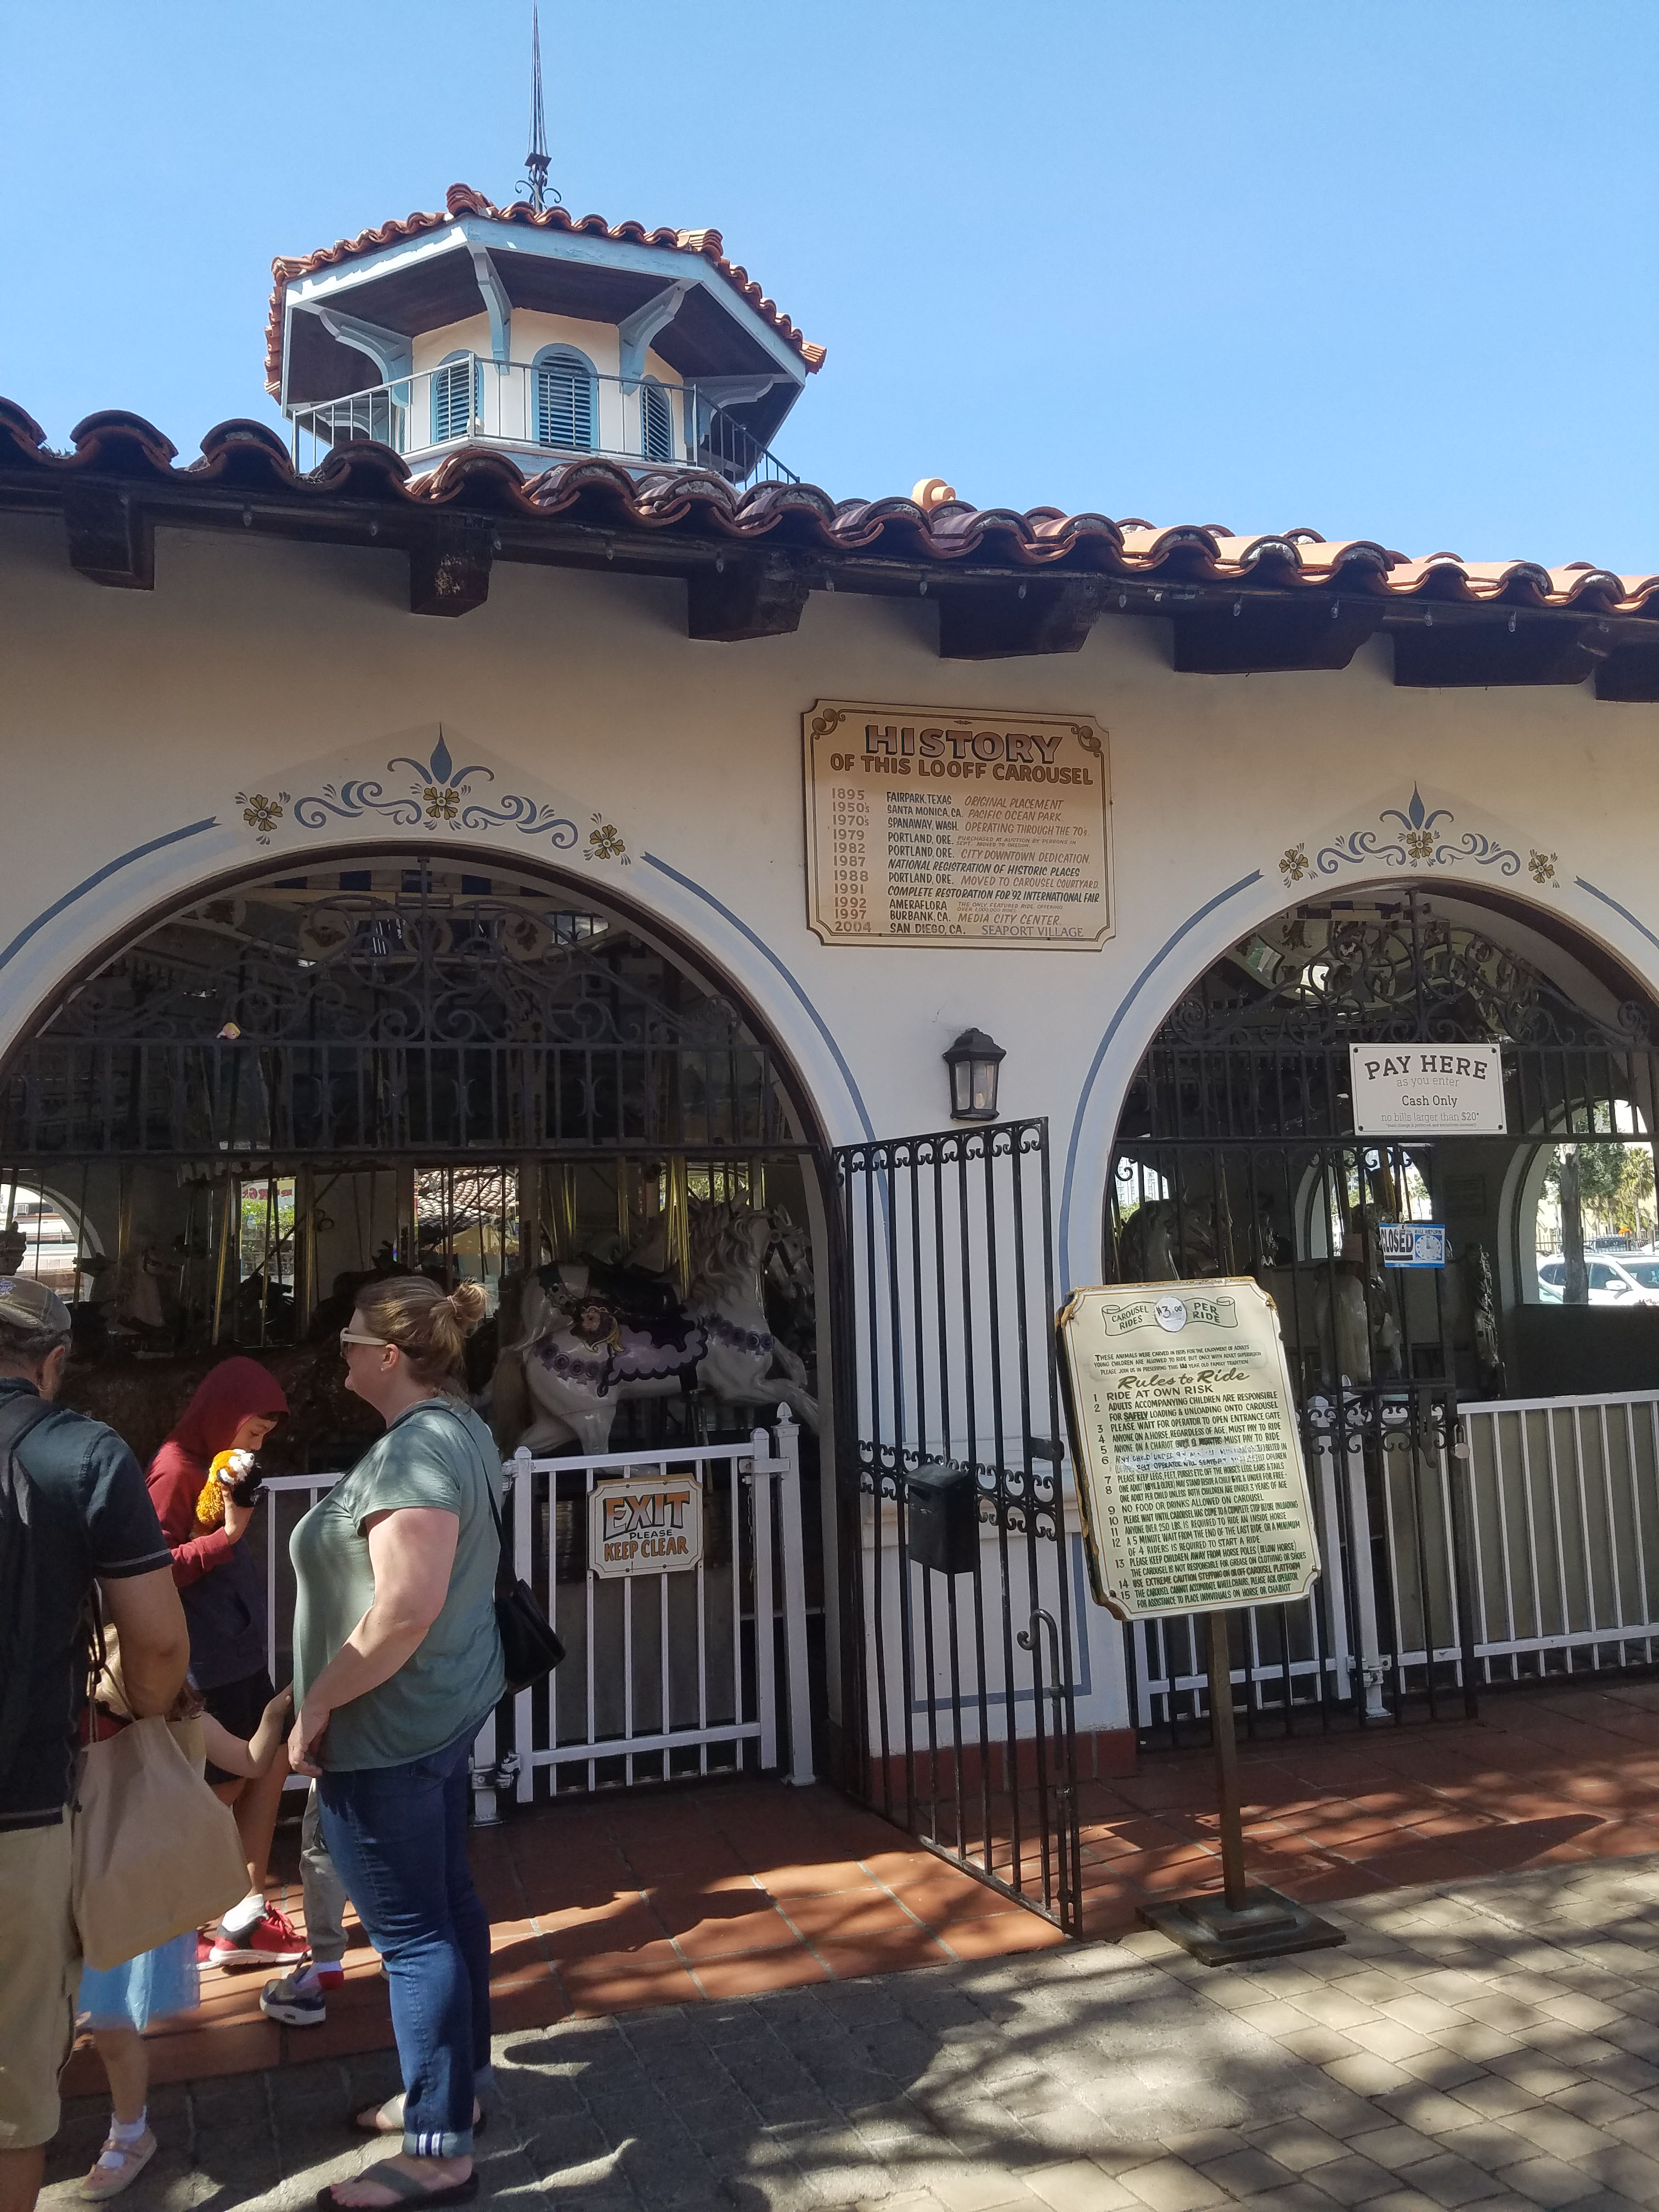 Family Guide to San Diego's Seaport Village with kids - Where to